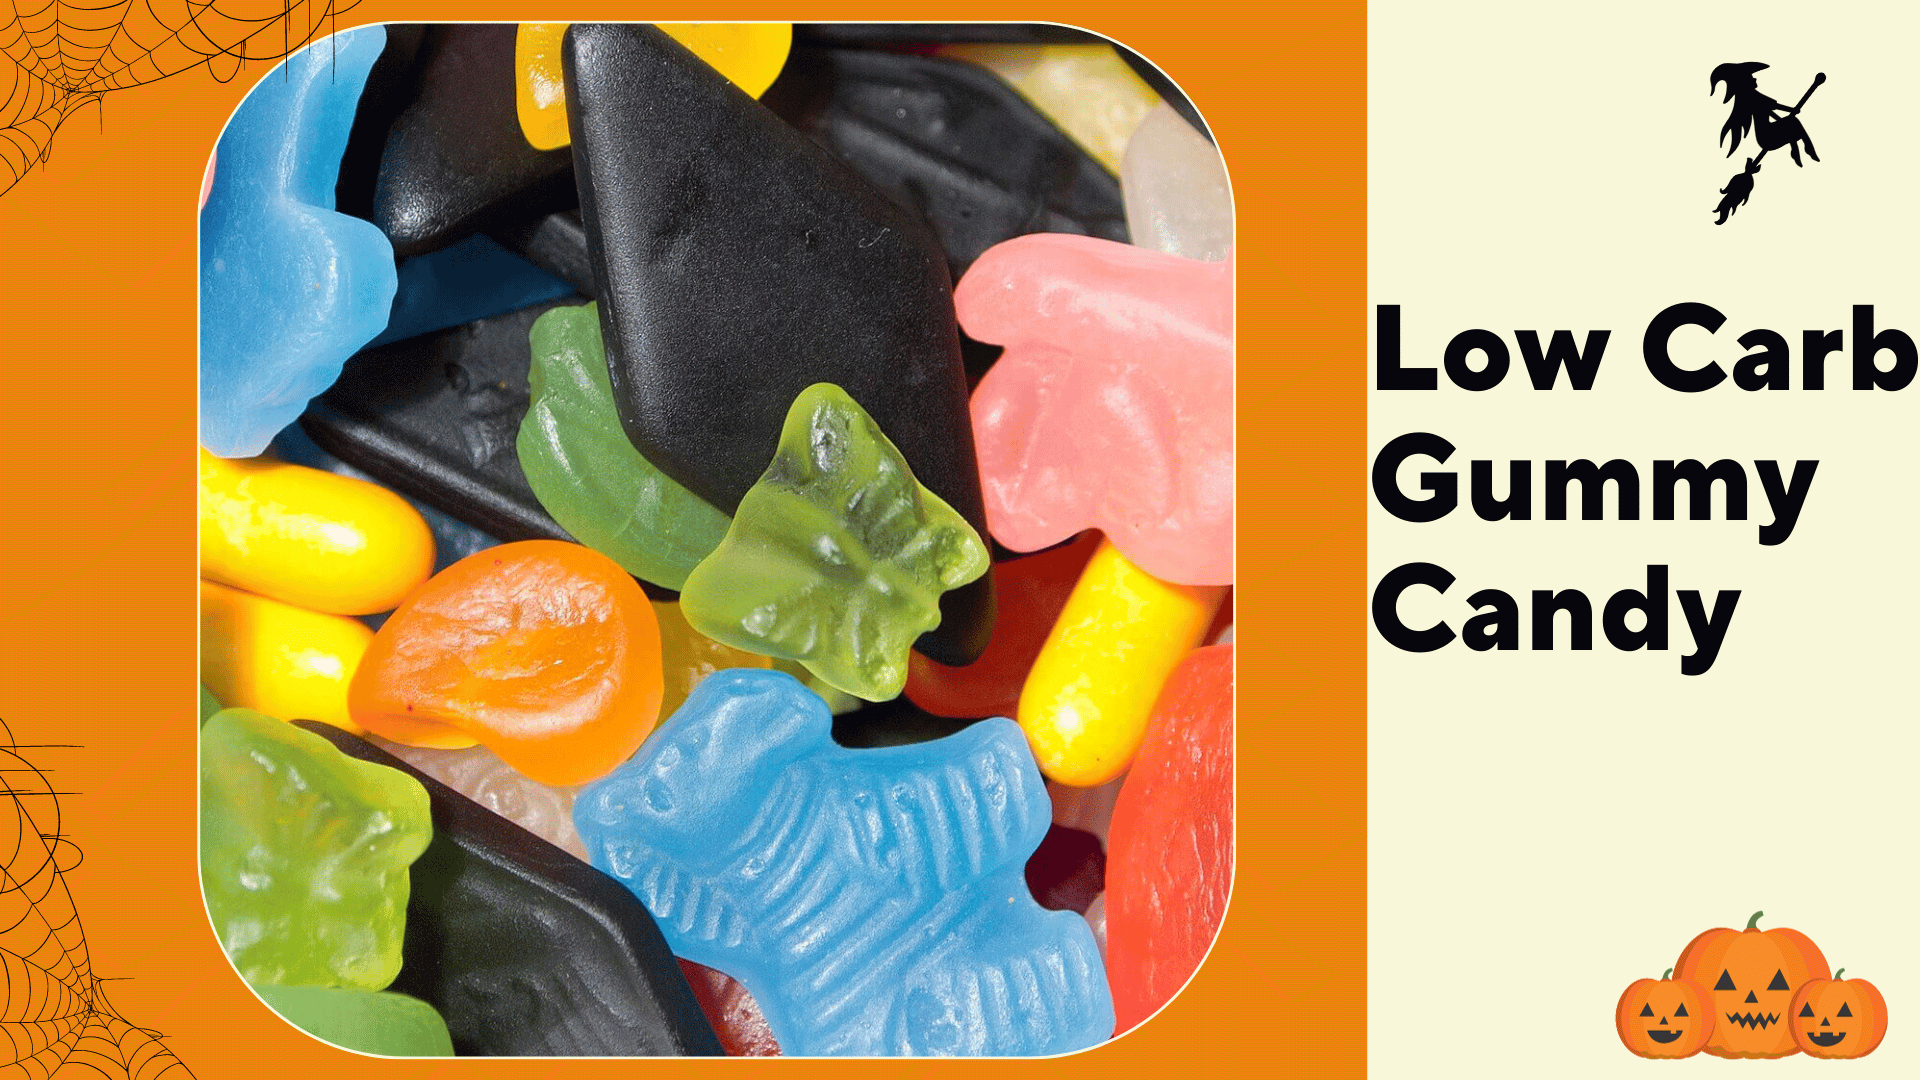 Low Carb Gummy Candy